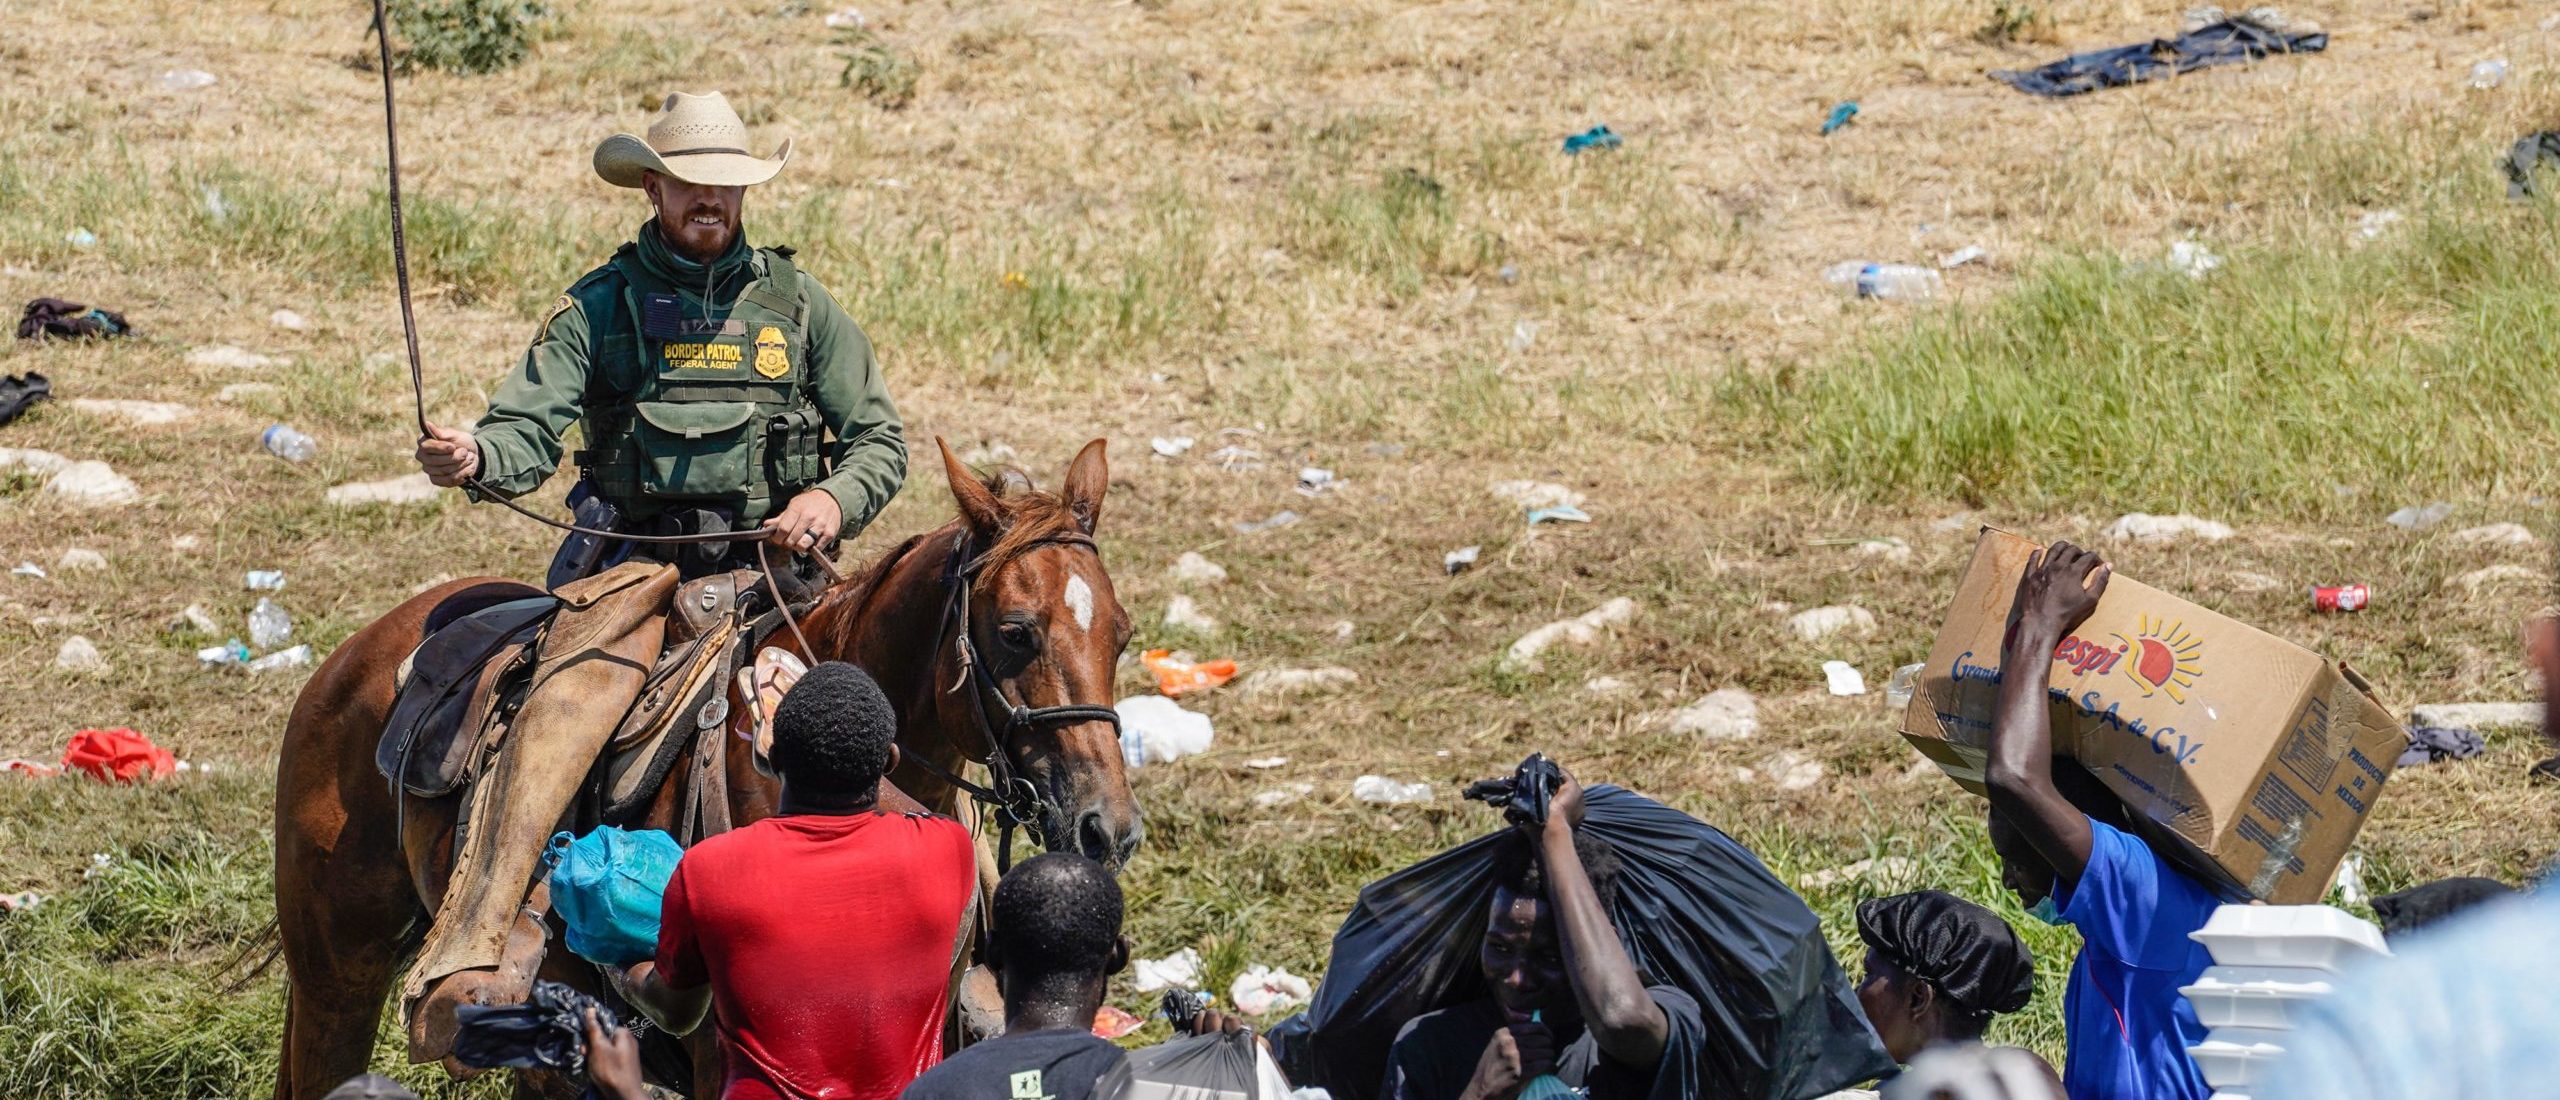 TOPSHOT - A United States Border Patrol agent on horseback uses the reins as he tries to stop Haitian migrants from entering an encampment on the banks of the Rio Grande near the Acuna Del Rio International Bridge in Del Rio, Texas on September 19, 2021. - The United States said Saturday it would ramp up deportation flights for thousands of migrants who flooded into the Texas border city of Del Rio, as authorities scramble to alleviate a burgeoning crisis for President Joe Biden's administration. (Photo by PAUL RATJE / AFP) (Photo by PAUL RATJE/AFP via Getty Images)